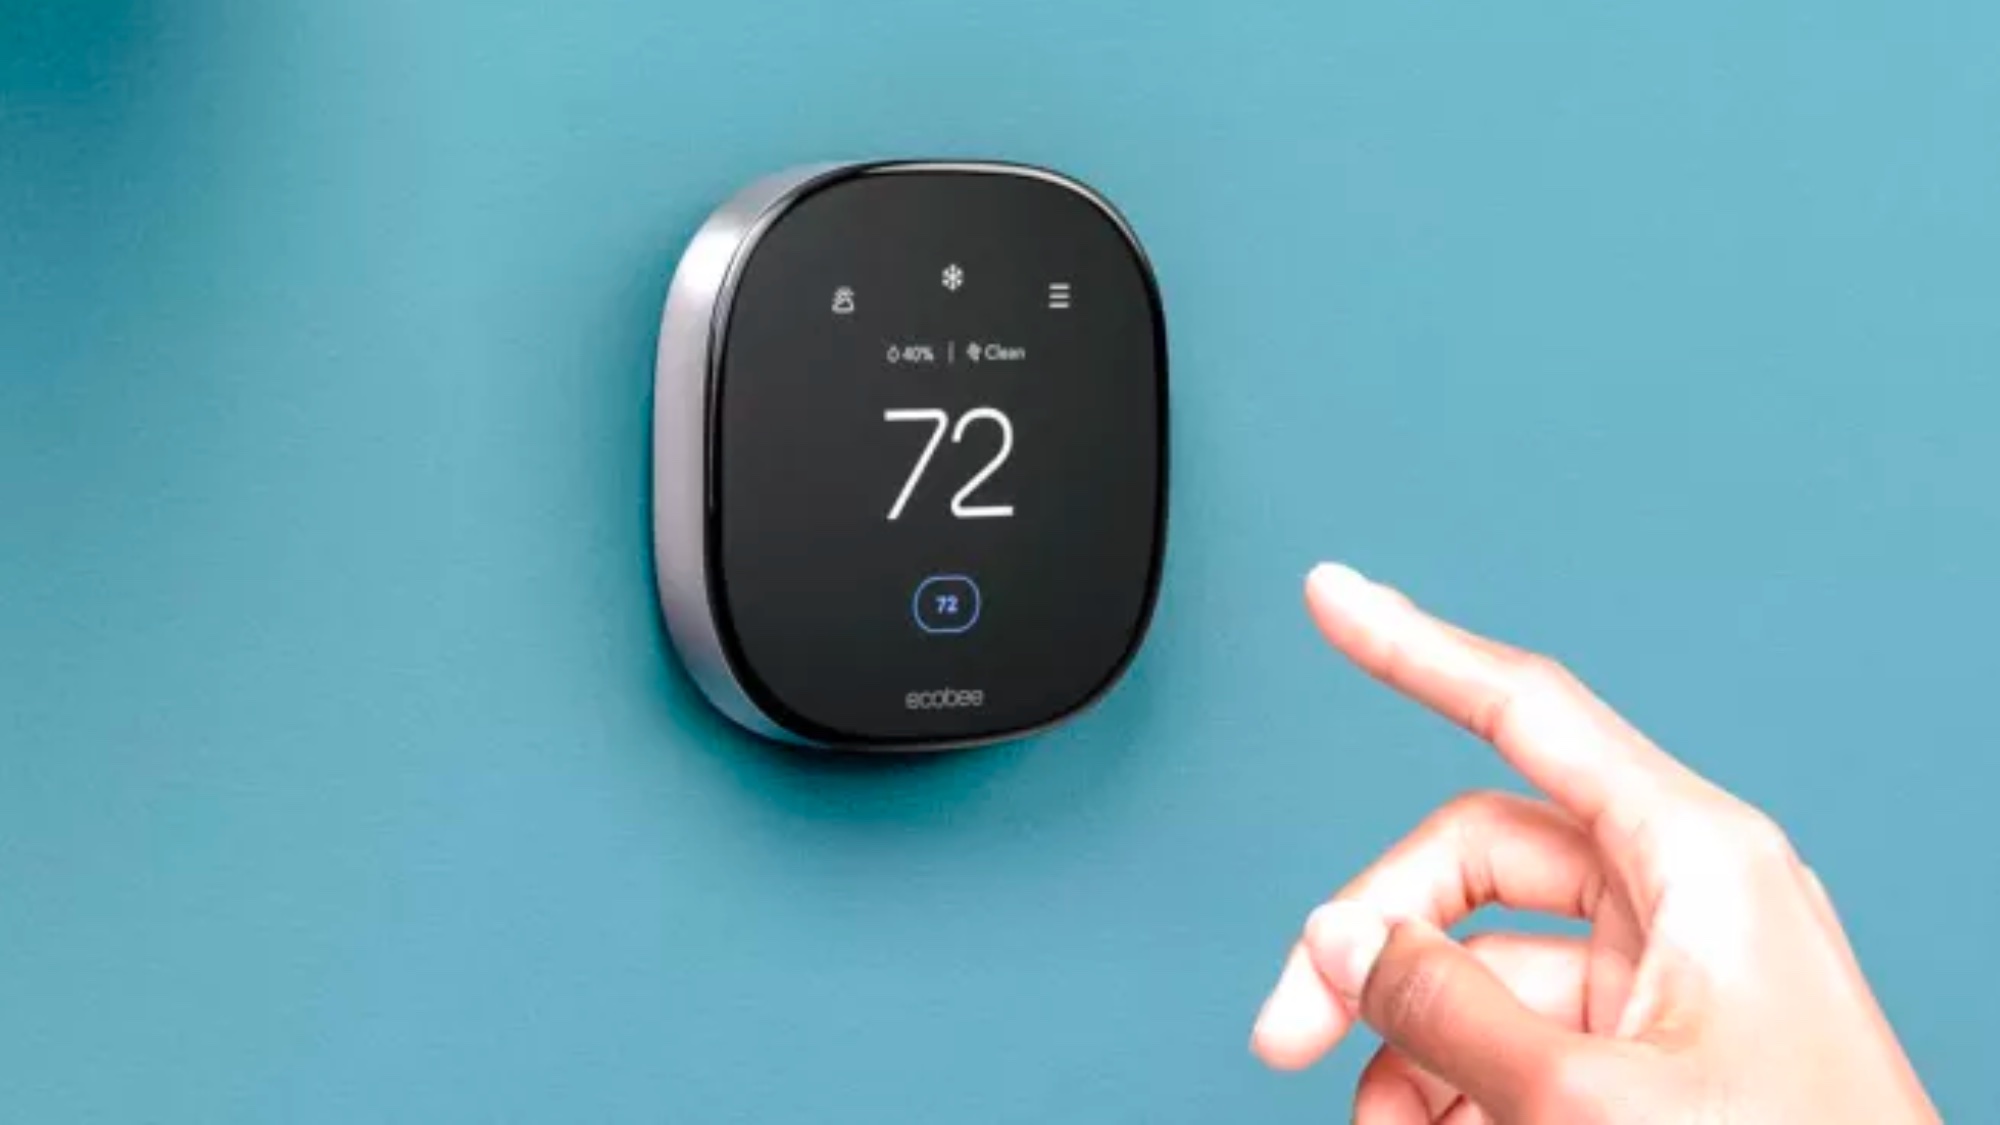 The Best Thermostat Temperature For Summer